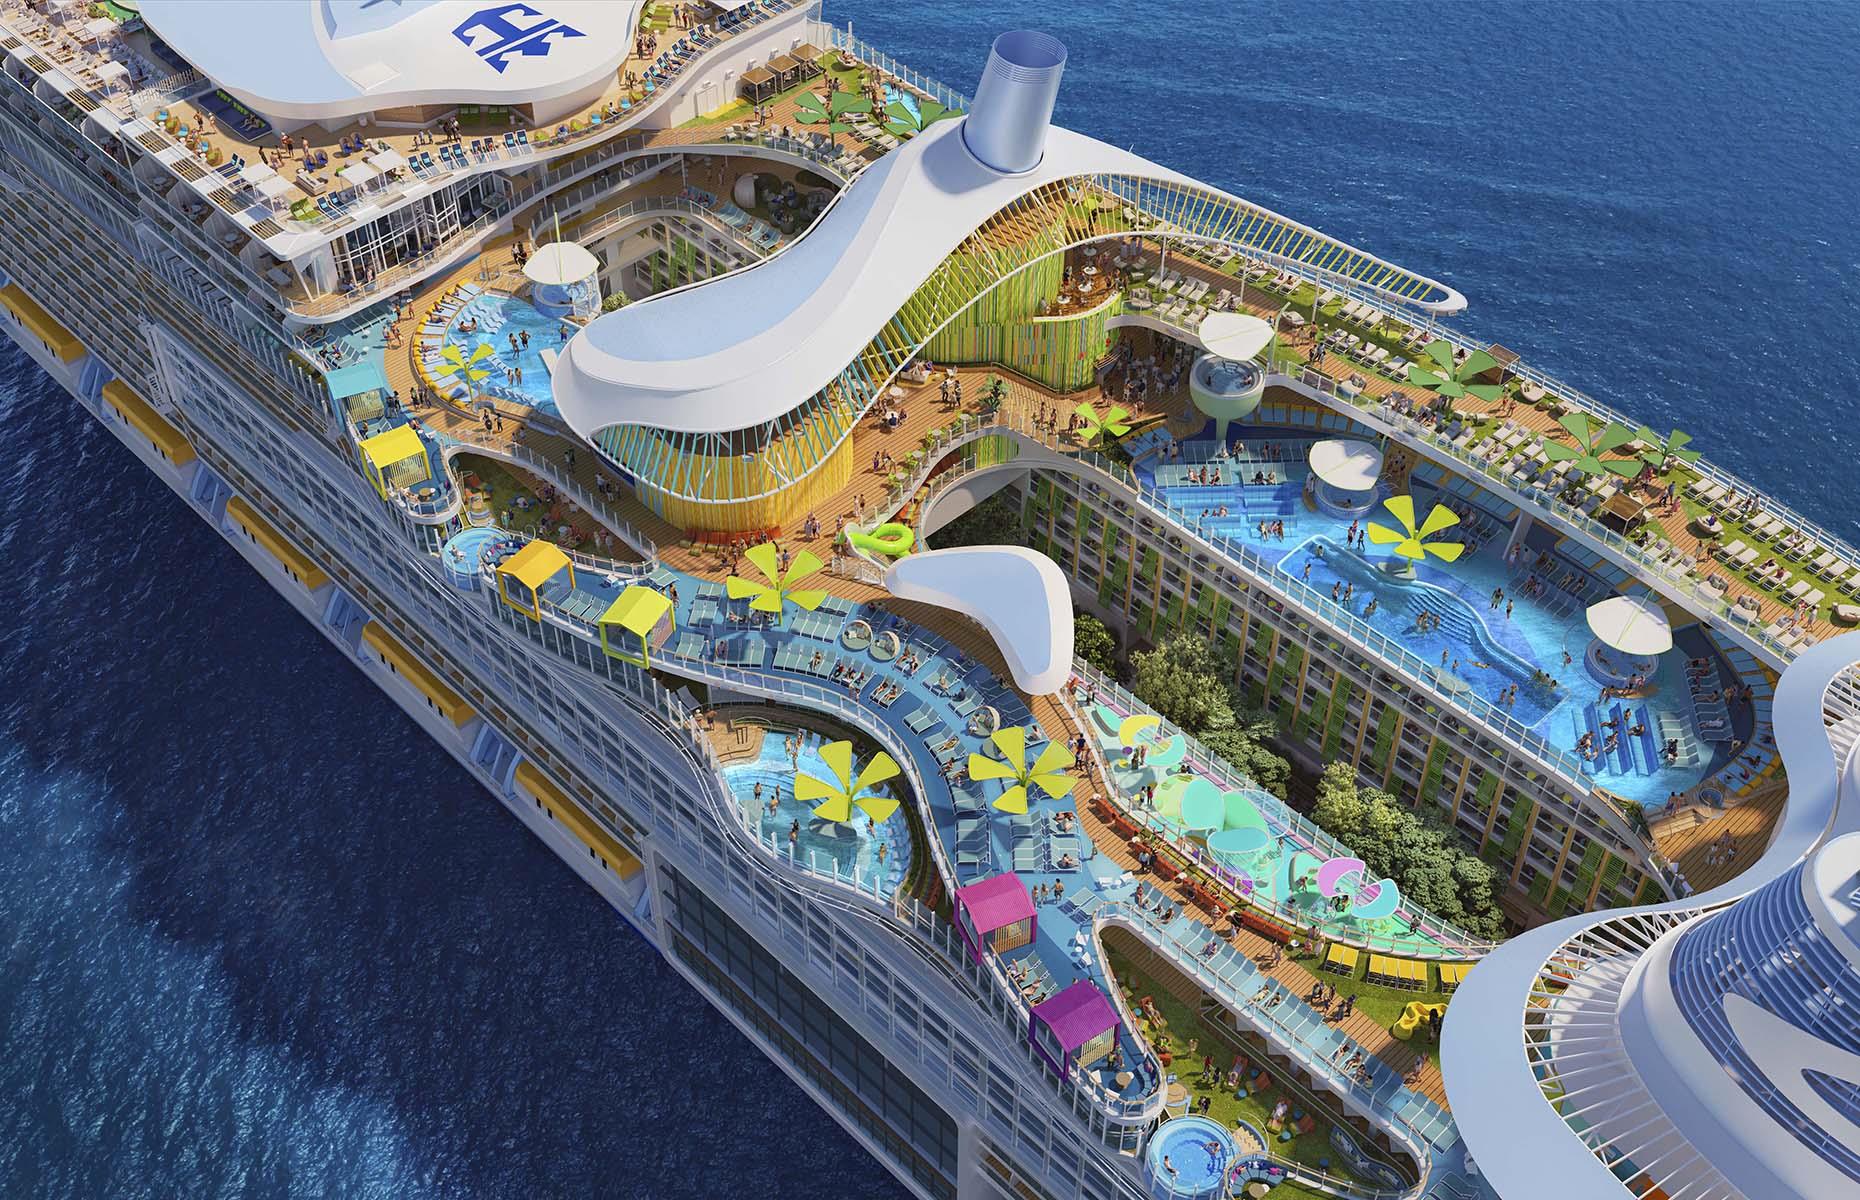 <p>In October 2023, tickets went on sale for seven-day voyages to the Caribbean aboard the boat, with prices starting at around $1,537 per person.</p>  <p>The sales resulted in Royal Caribbean achieving its "single largest booking day in the company's 53-year history," neatly underscoring the excitement surrounding this gigantic new cruise ship.</p>